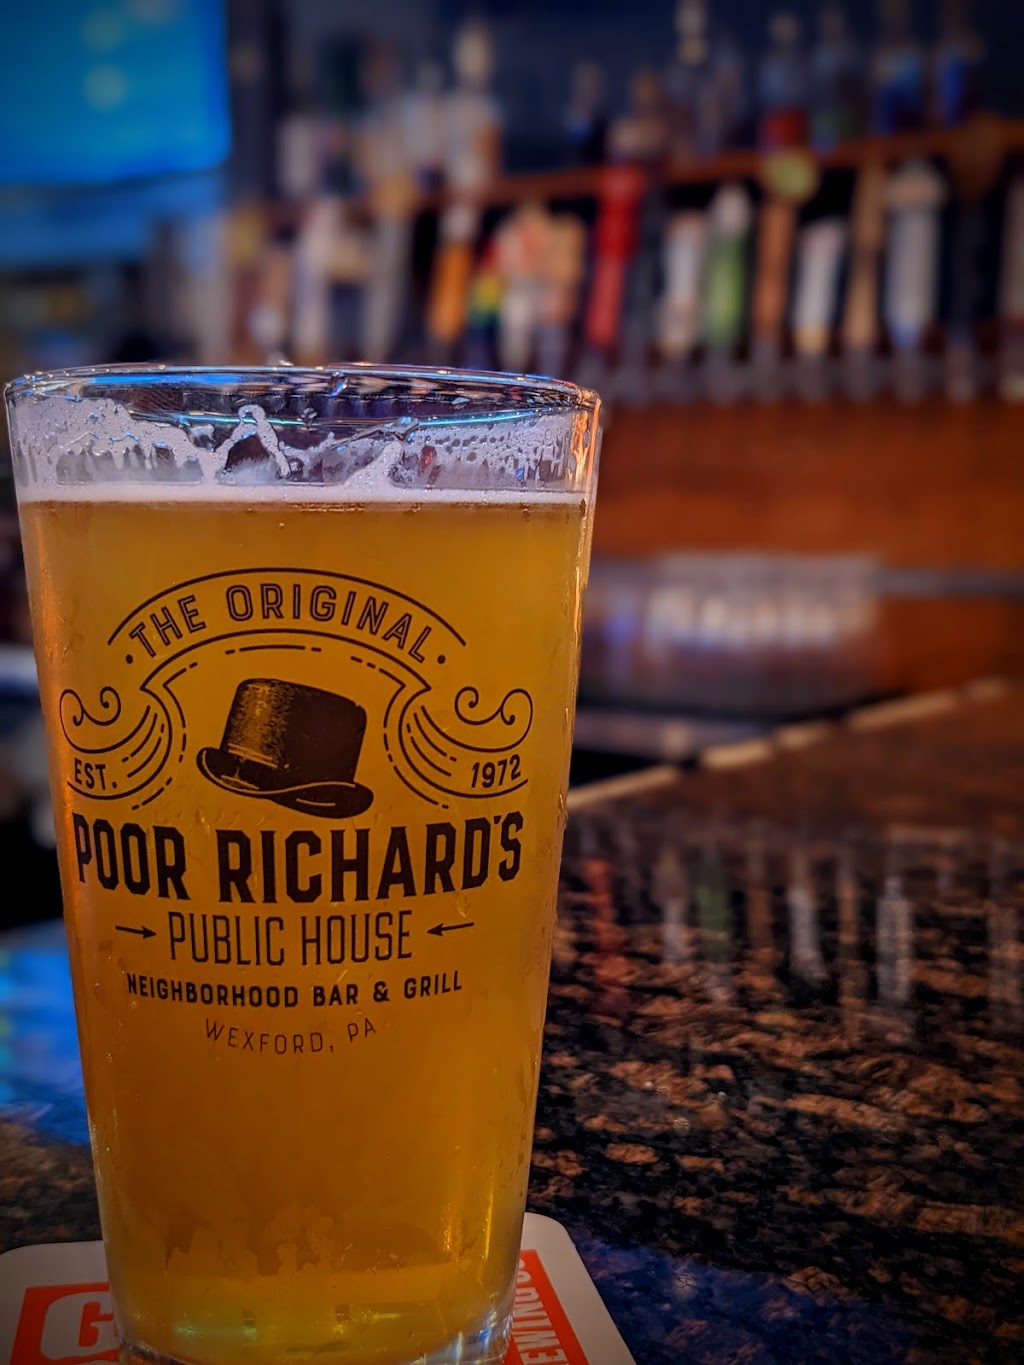 Poor Richards Public House | 10501 Perry Hwy, Wexford, PA 15090 | Phone: (724) 935-9870